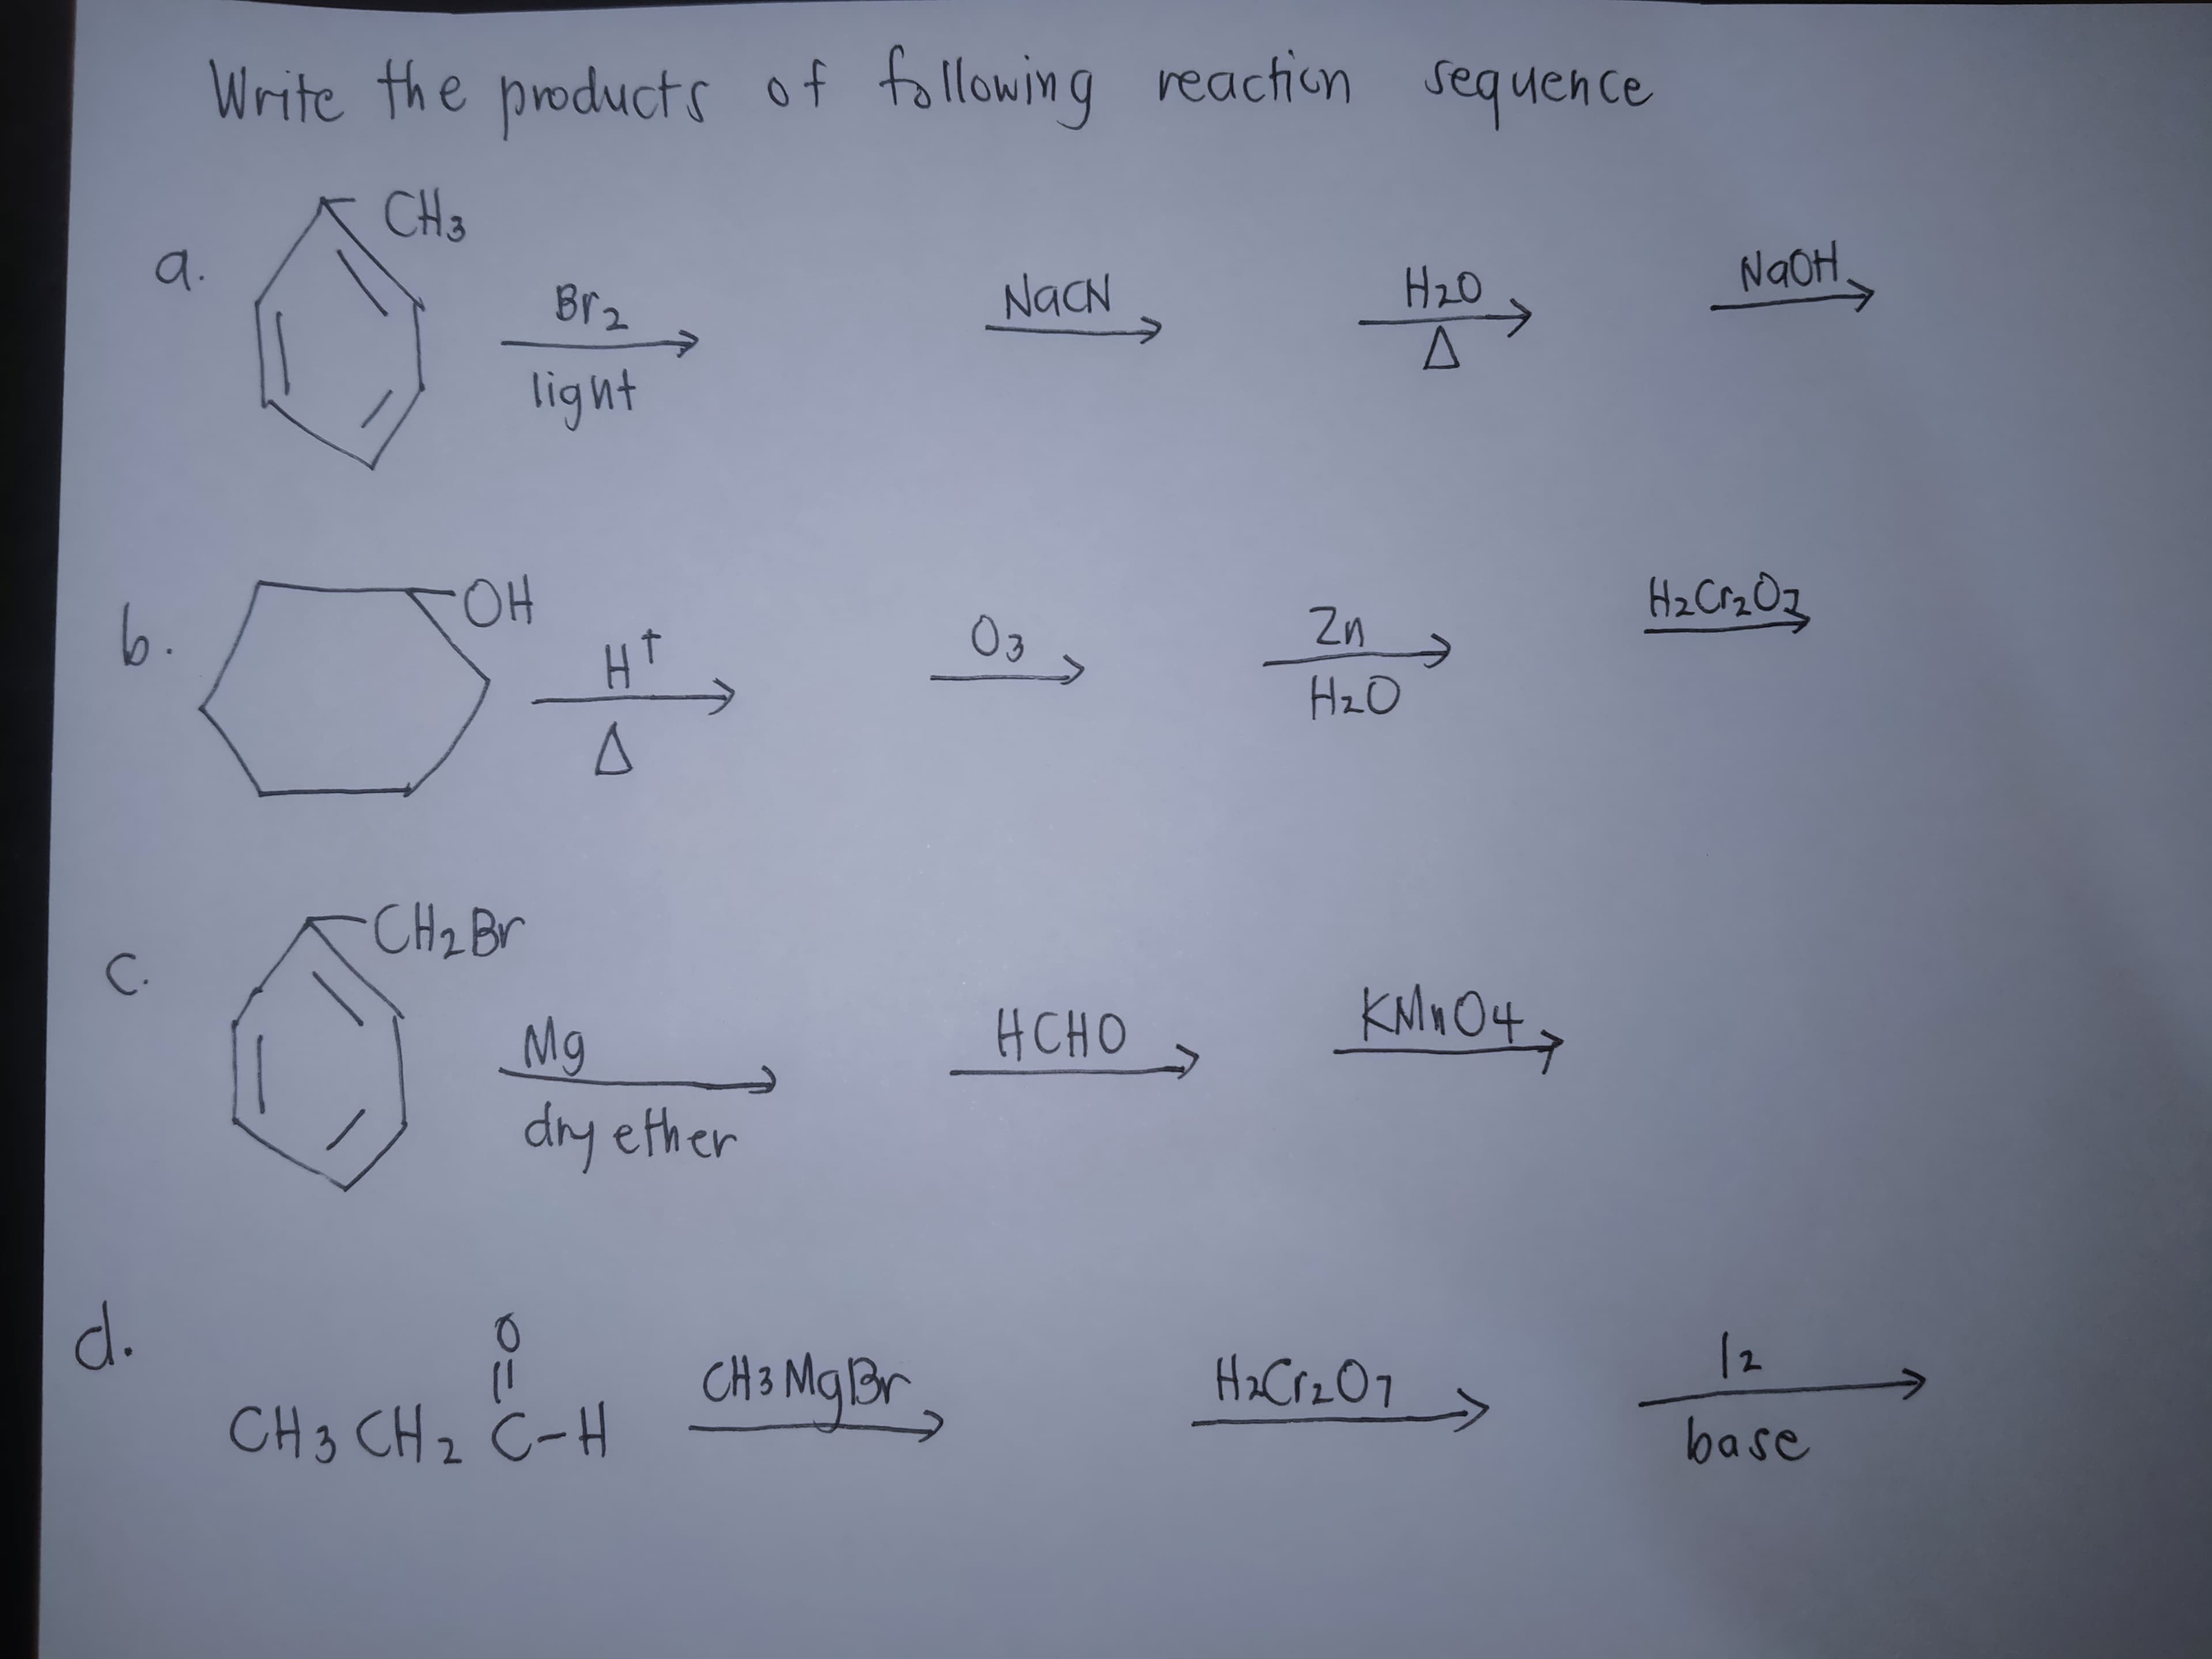 Write the products of following reaction sequence
CH3
a.
Br2
NaCN
H20
NaOH,
light
6.
OH
HT
Zn
HzO
CH2BV
C.
KNO O4y
Mg
dry ether
HCHO
d.
CH 3 MqBr
Ha CrzO7
12
CH3 CH z C-H
base
